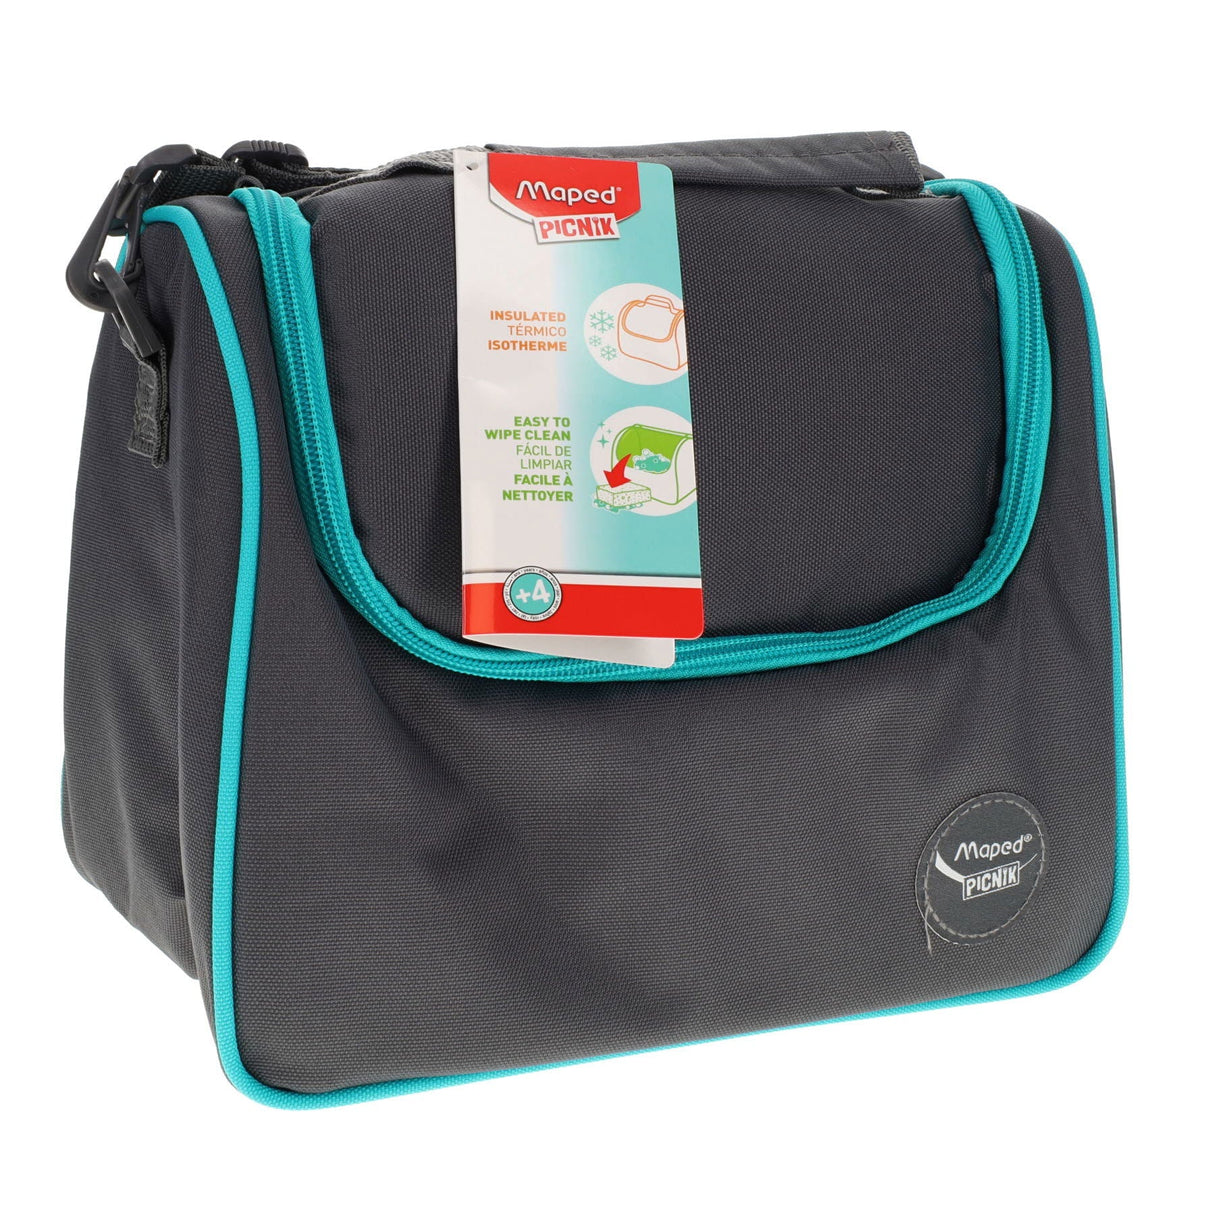 Maped Picnik Lunch Bag - Grey-Lunch Bags- Buy Online at Stationery Shop UK